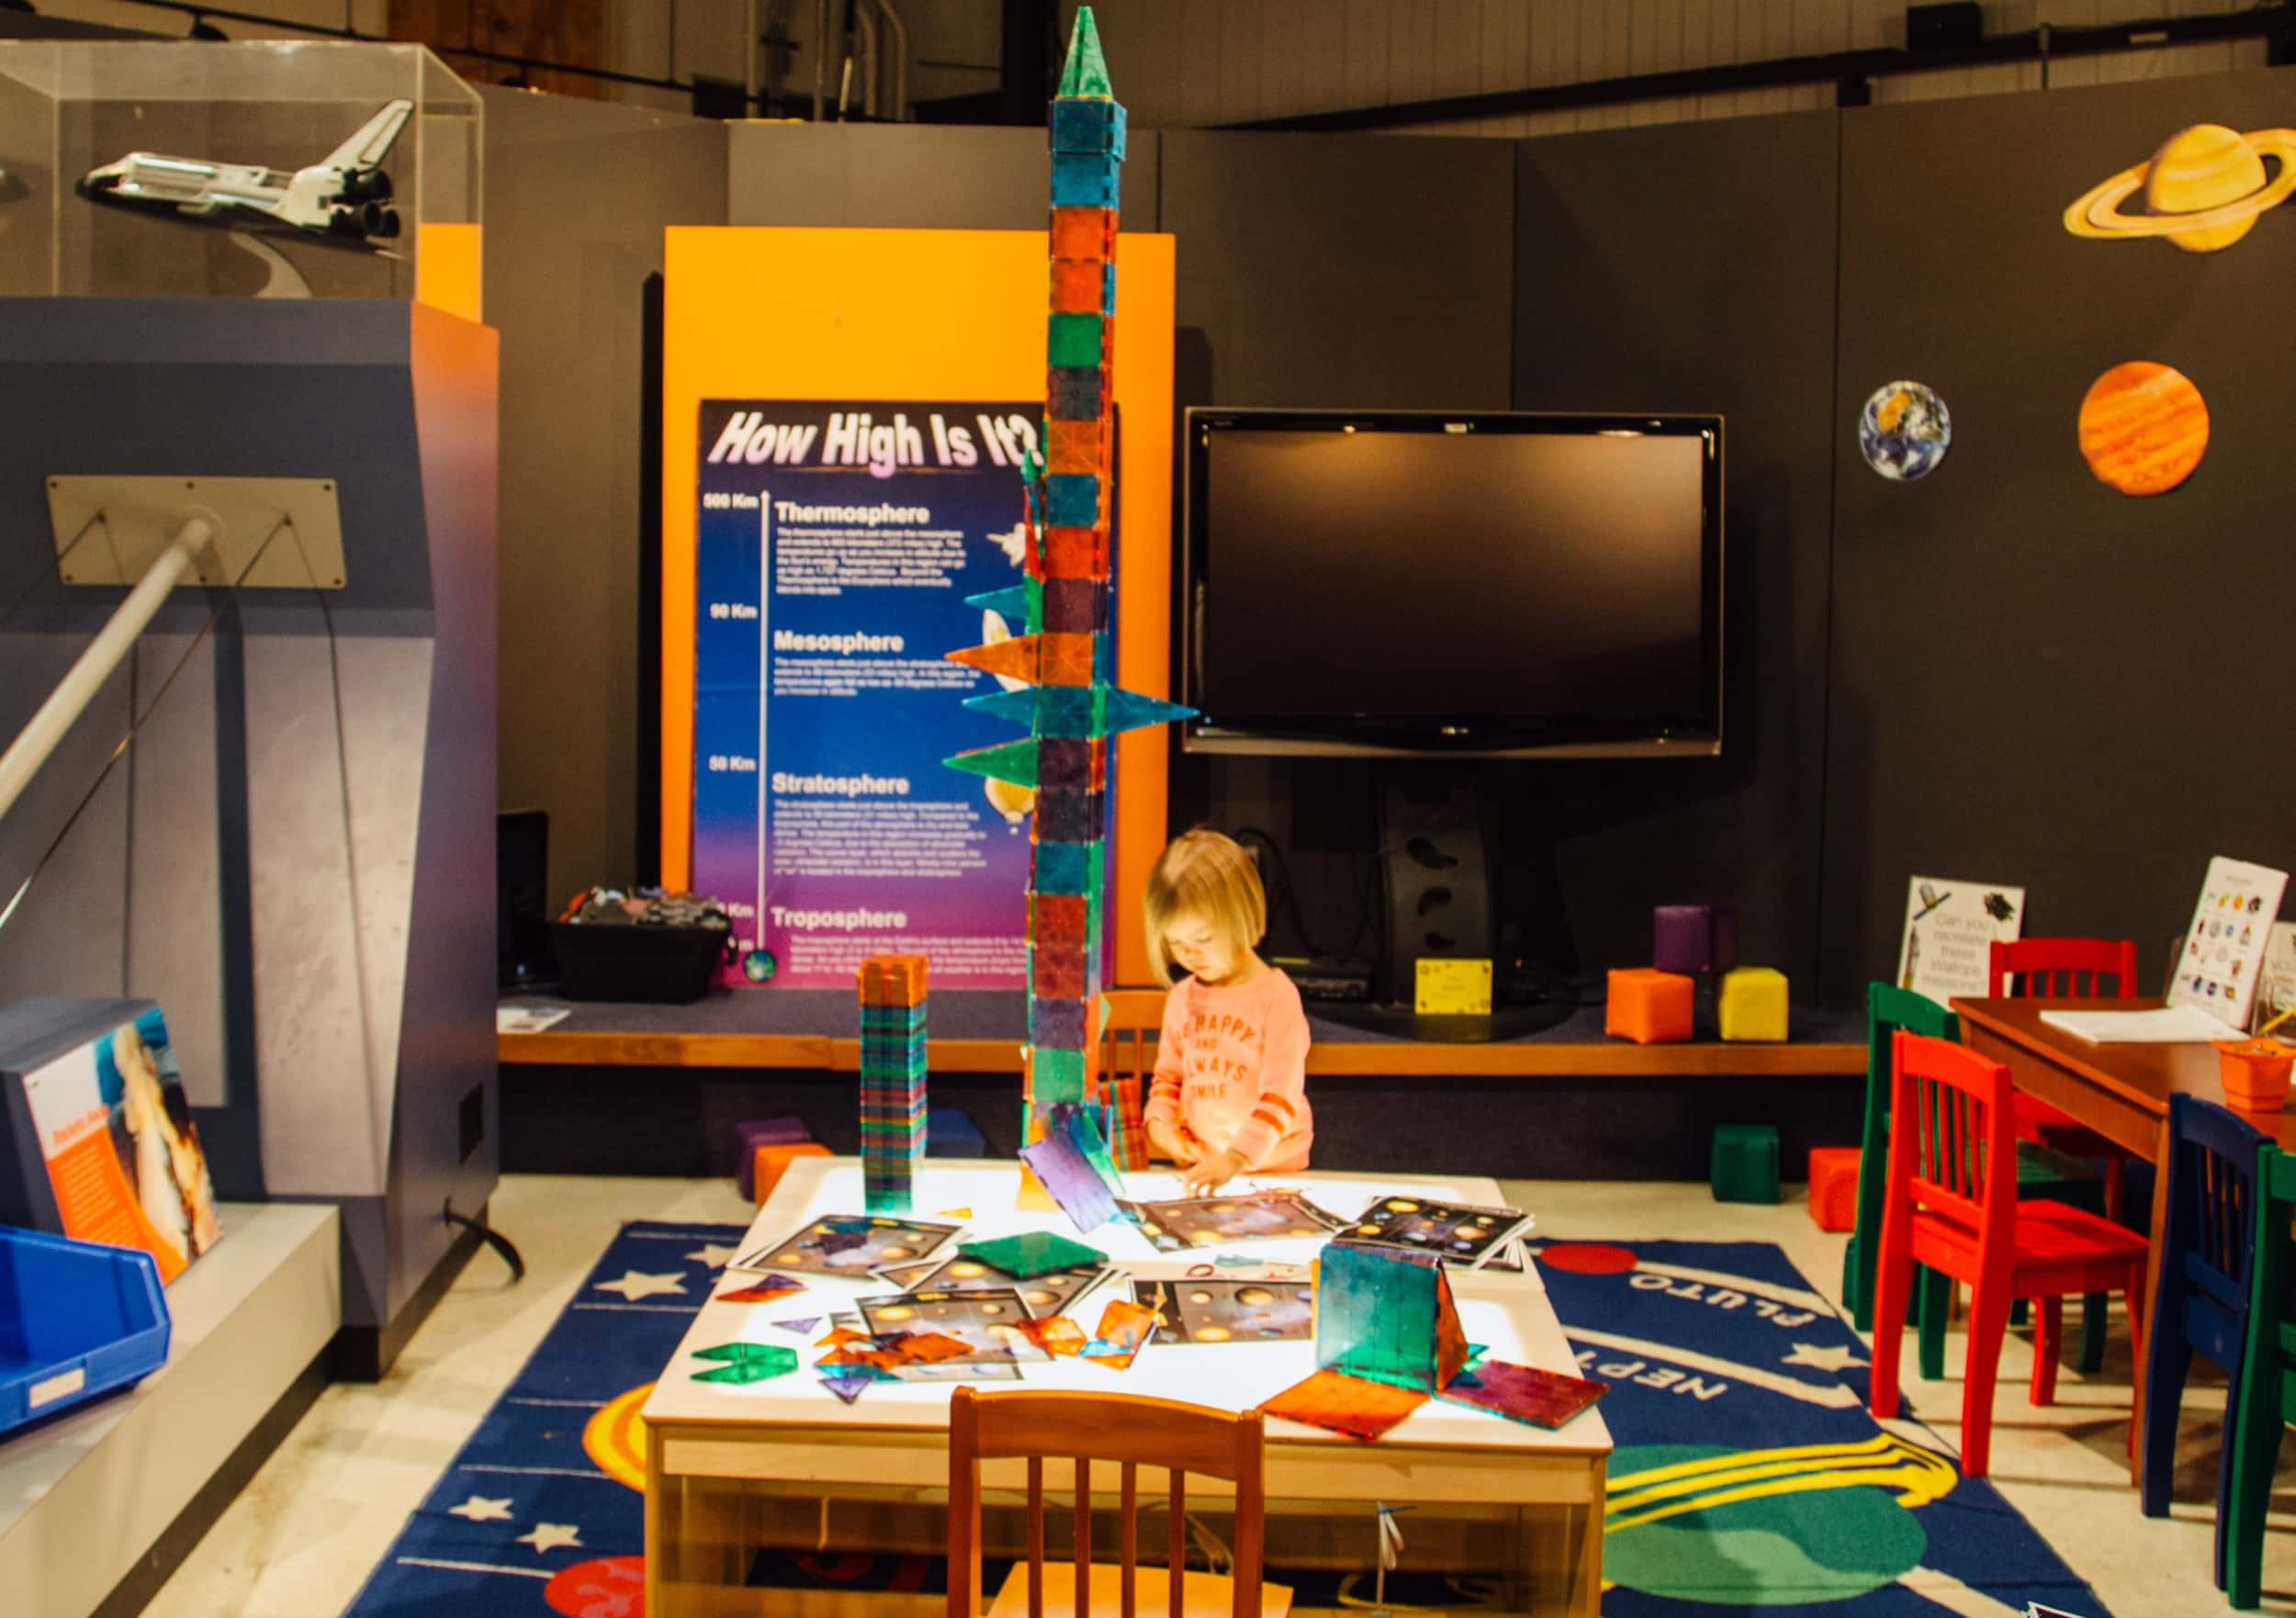 The kids area of Wallops Visitor Center - and this was taken before their new exhibits! (Photo by NASA).